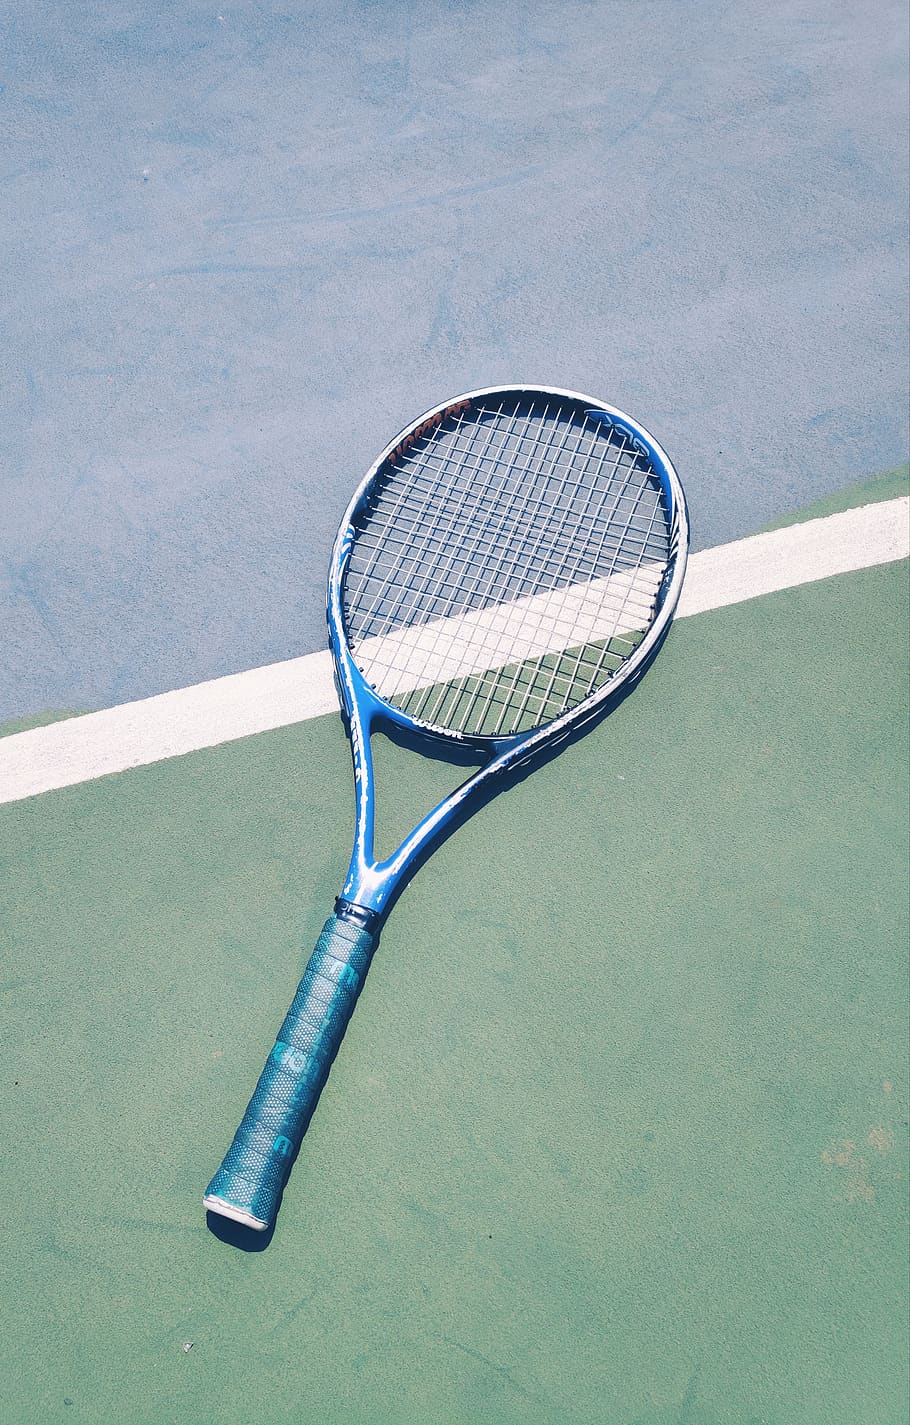 A tennis racket is laying on the ground - Tennis